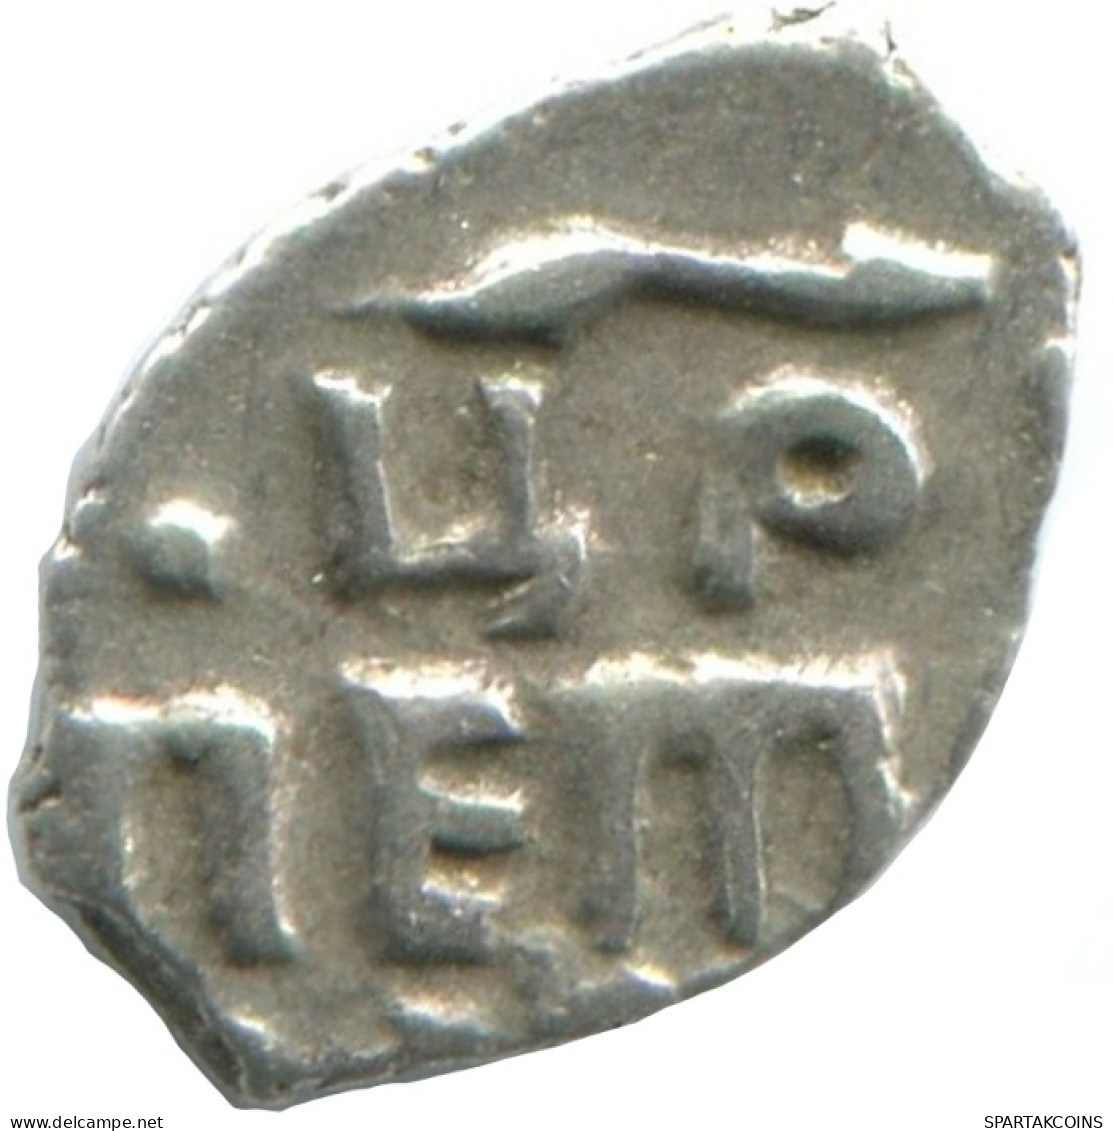 RUSSIE RUSSIA 1702 KOPECK PETER I KADASHEVSKY Mint MOSCOW ARGENT 0.3g/9mm #AB594.10.F.A - Russia